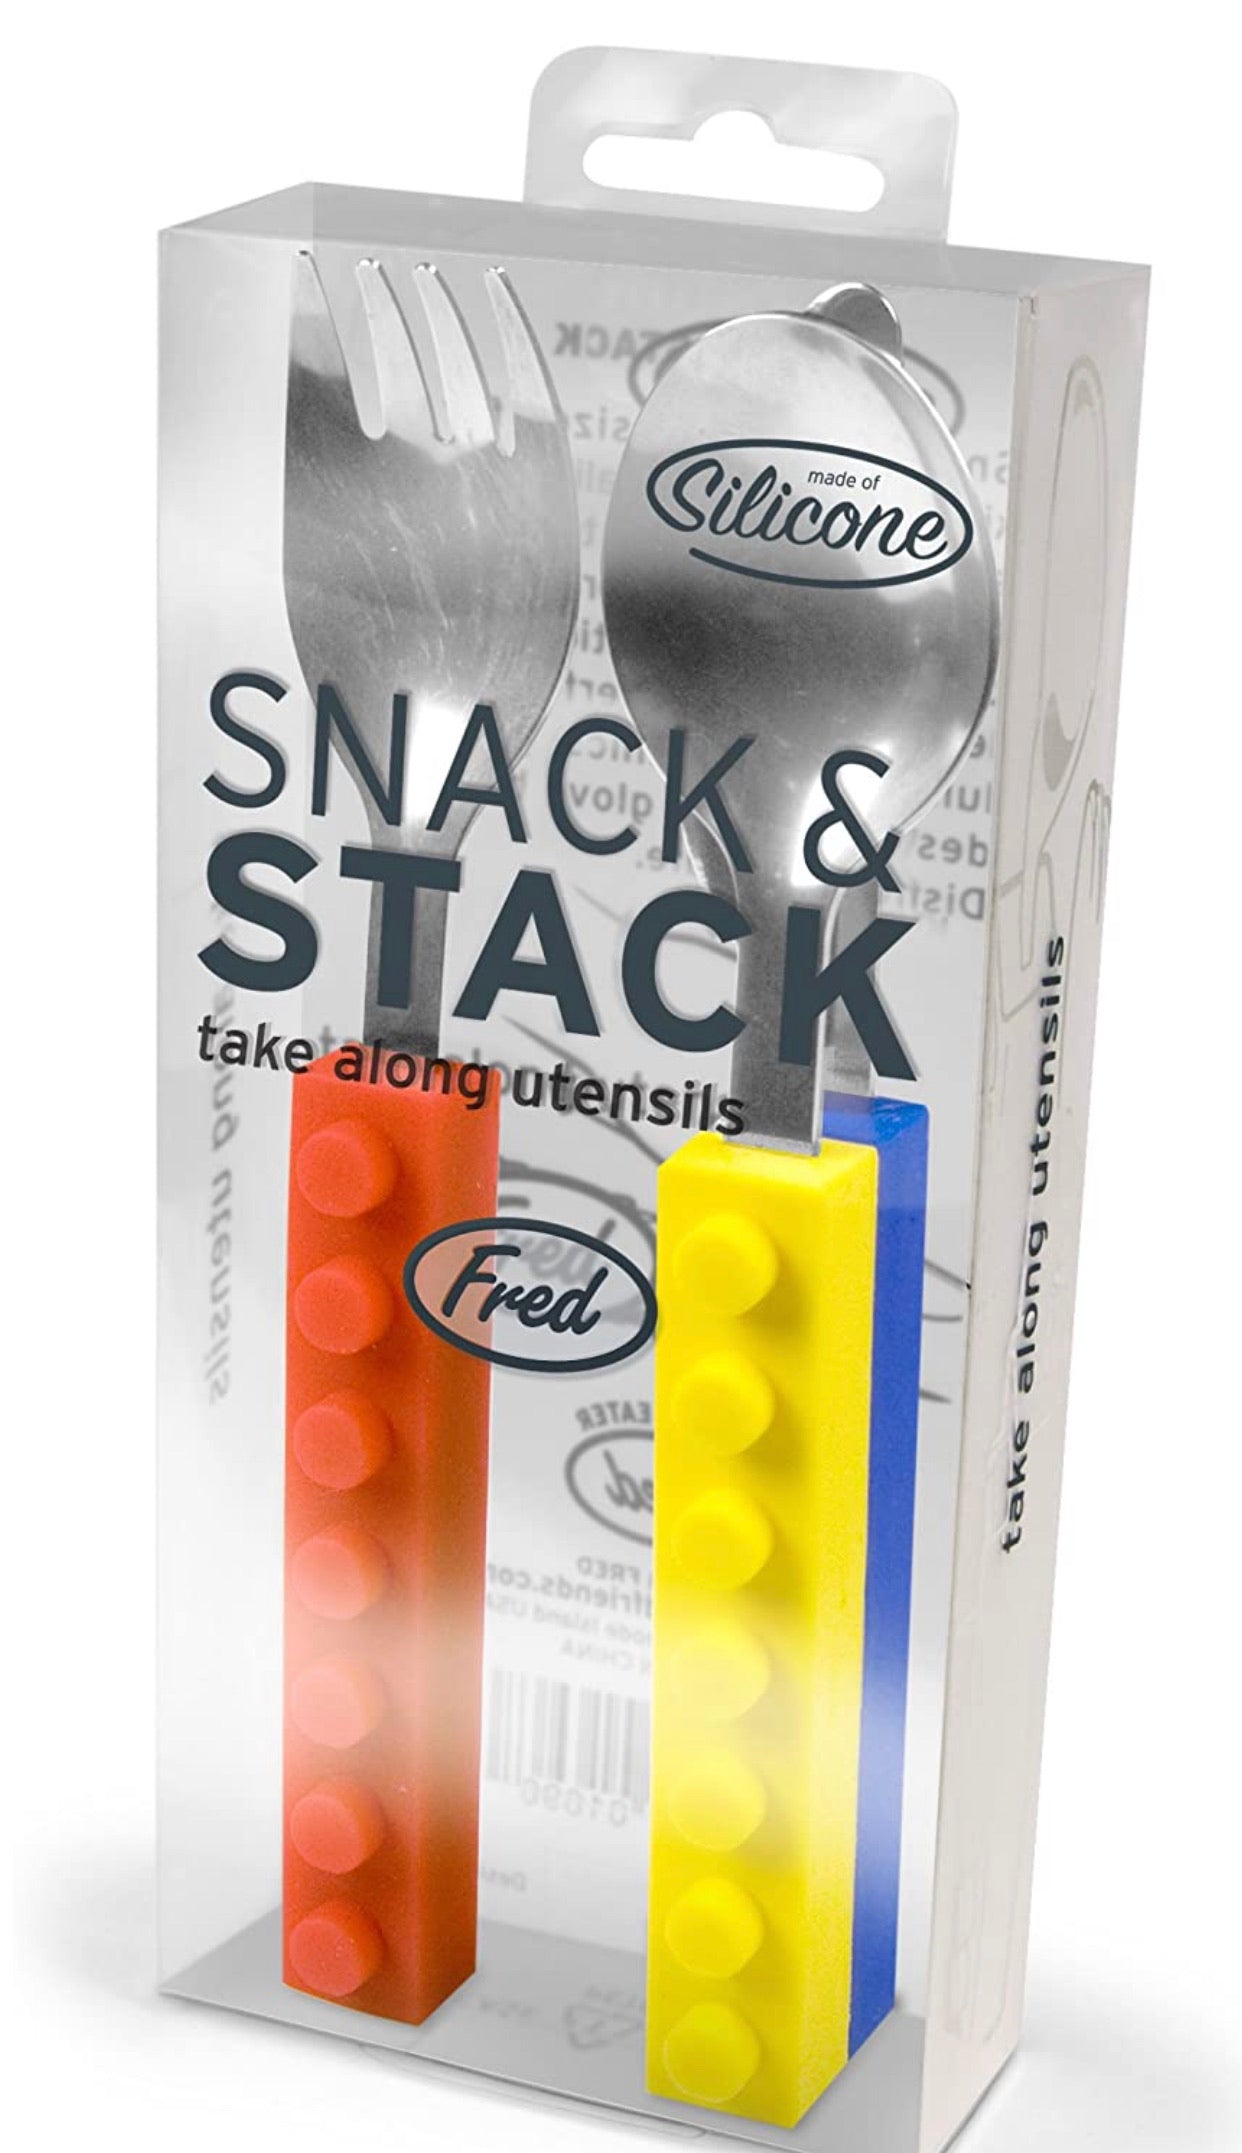 Fred Snack & Stack